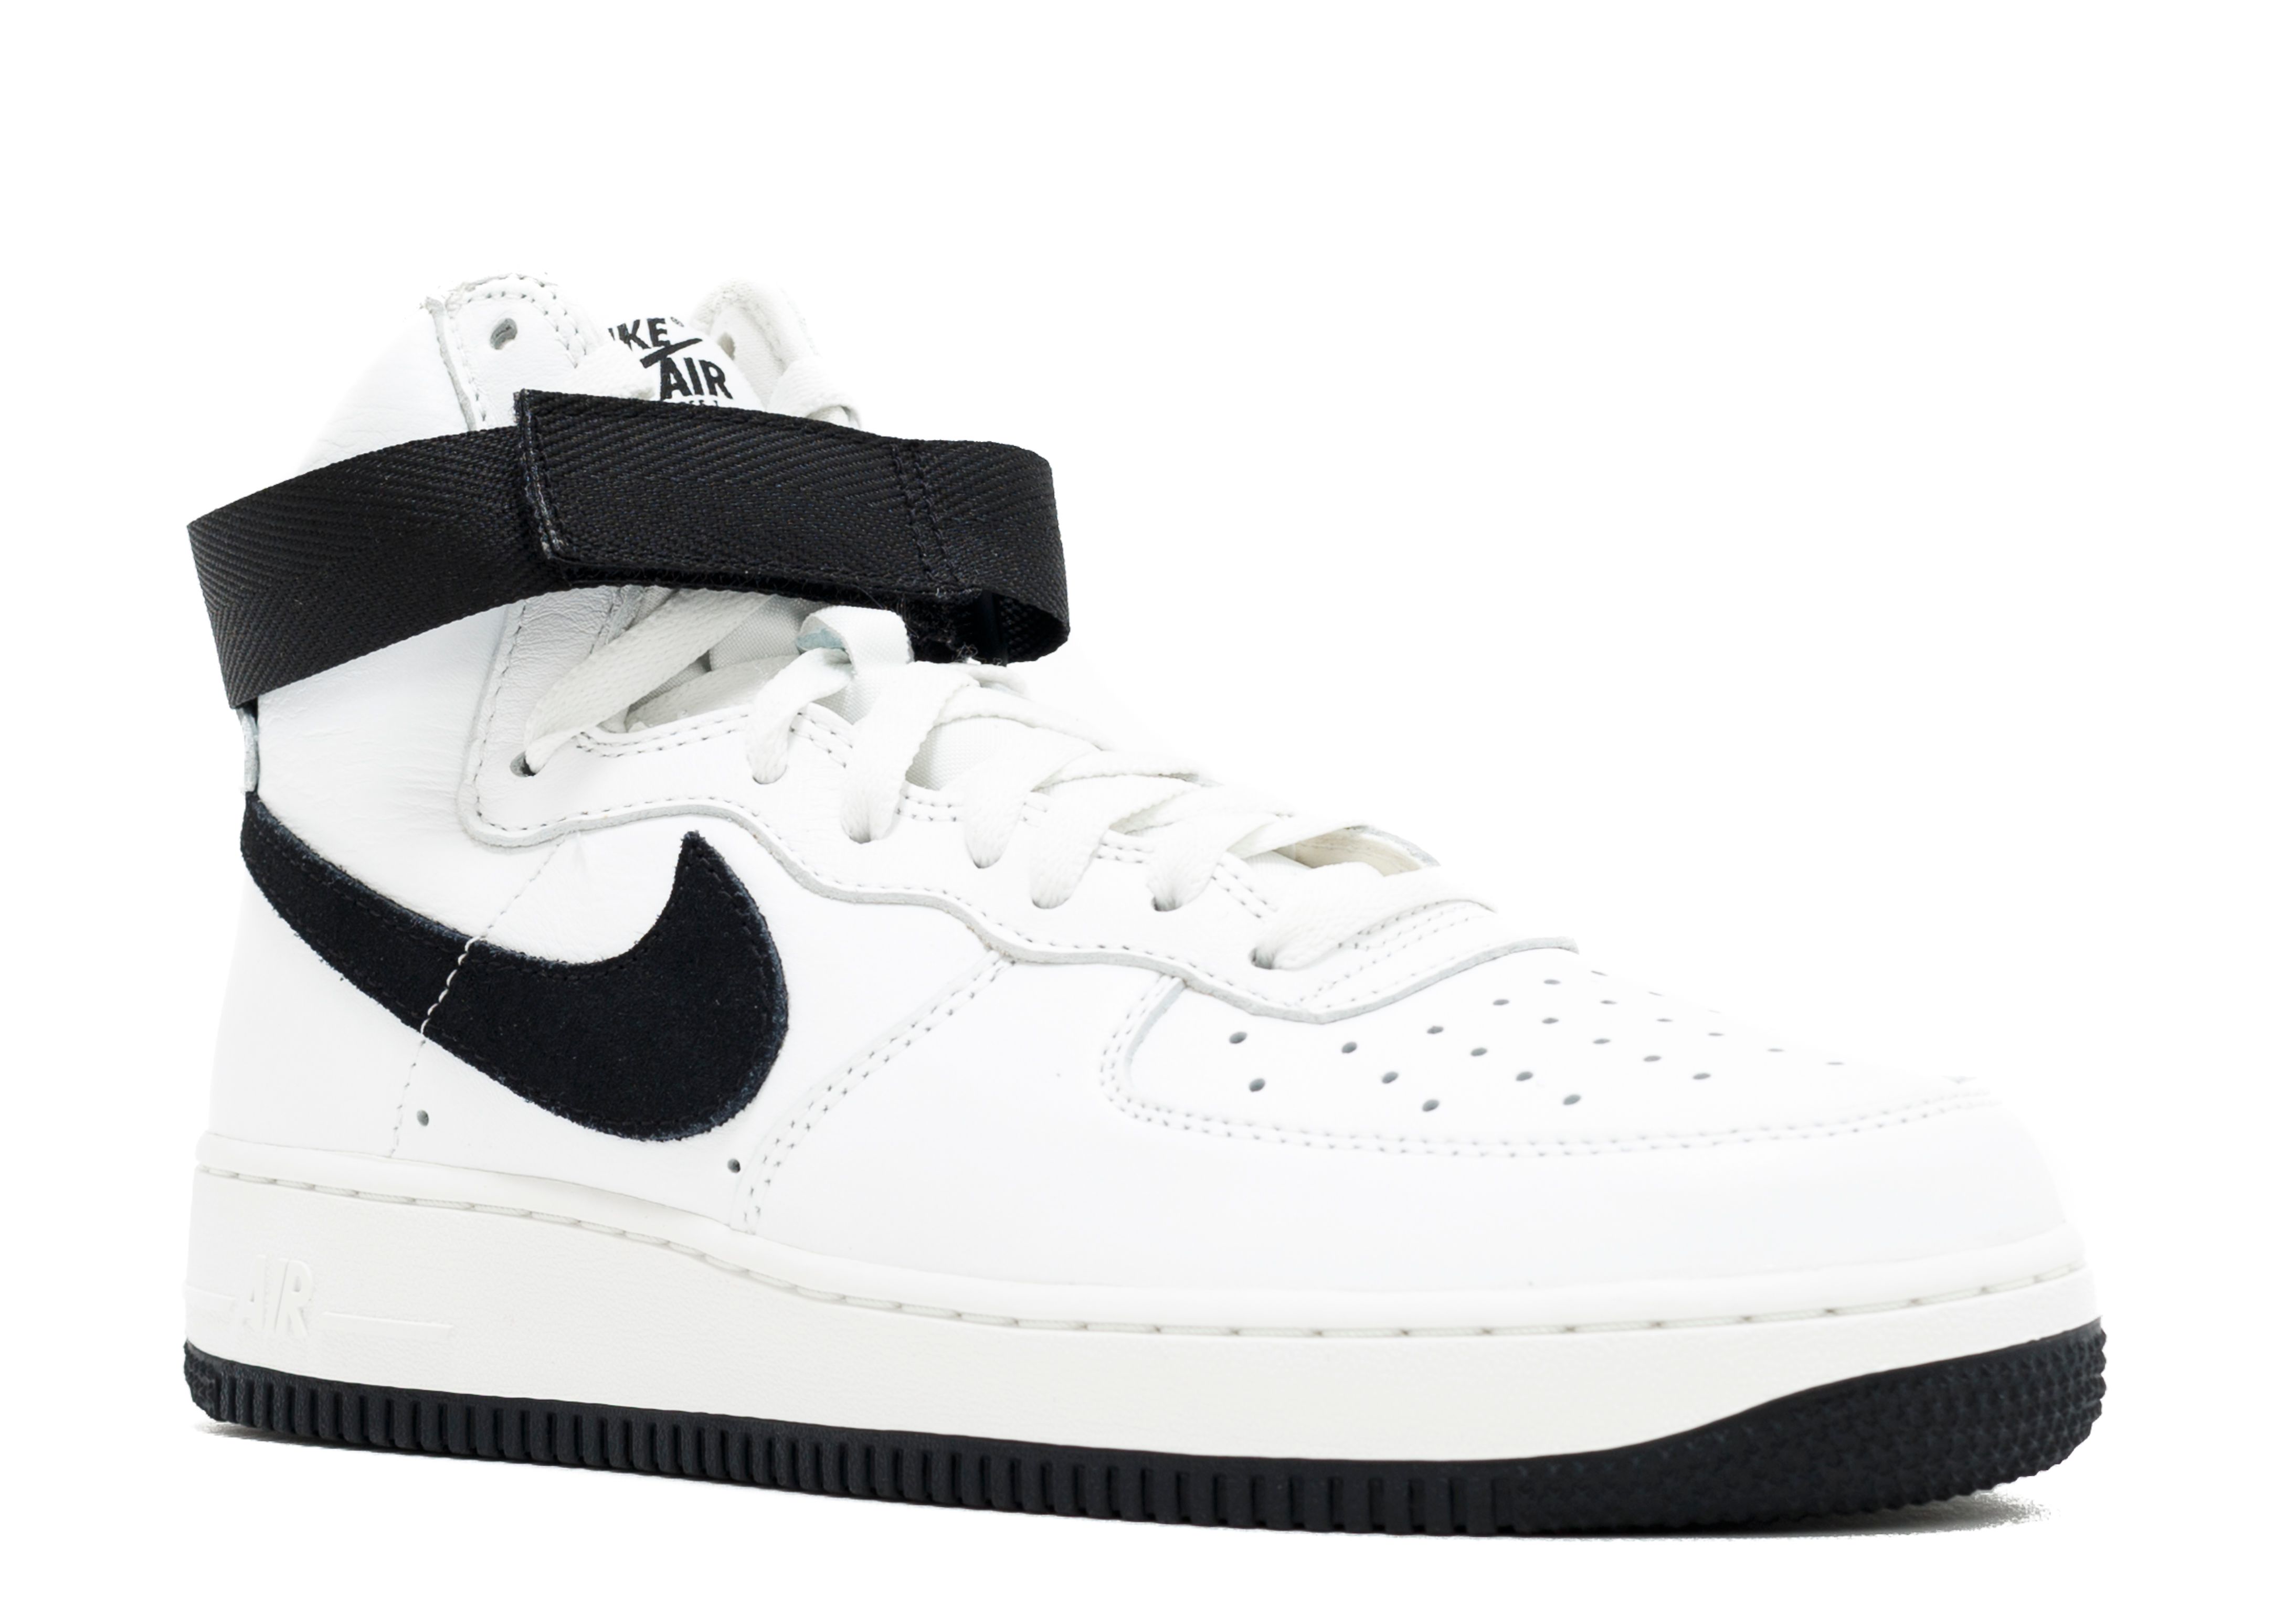 air force 1 retro high black and white